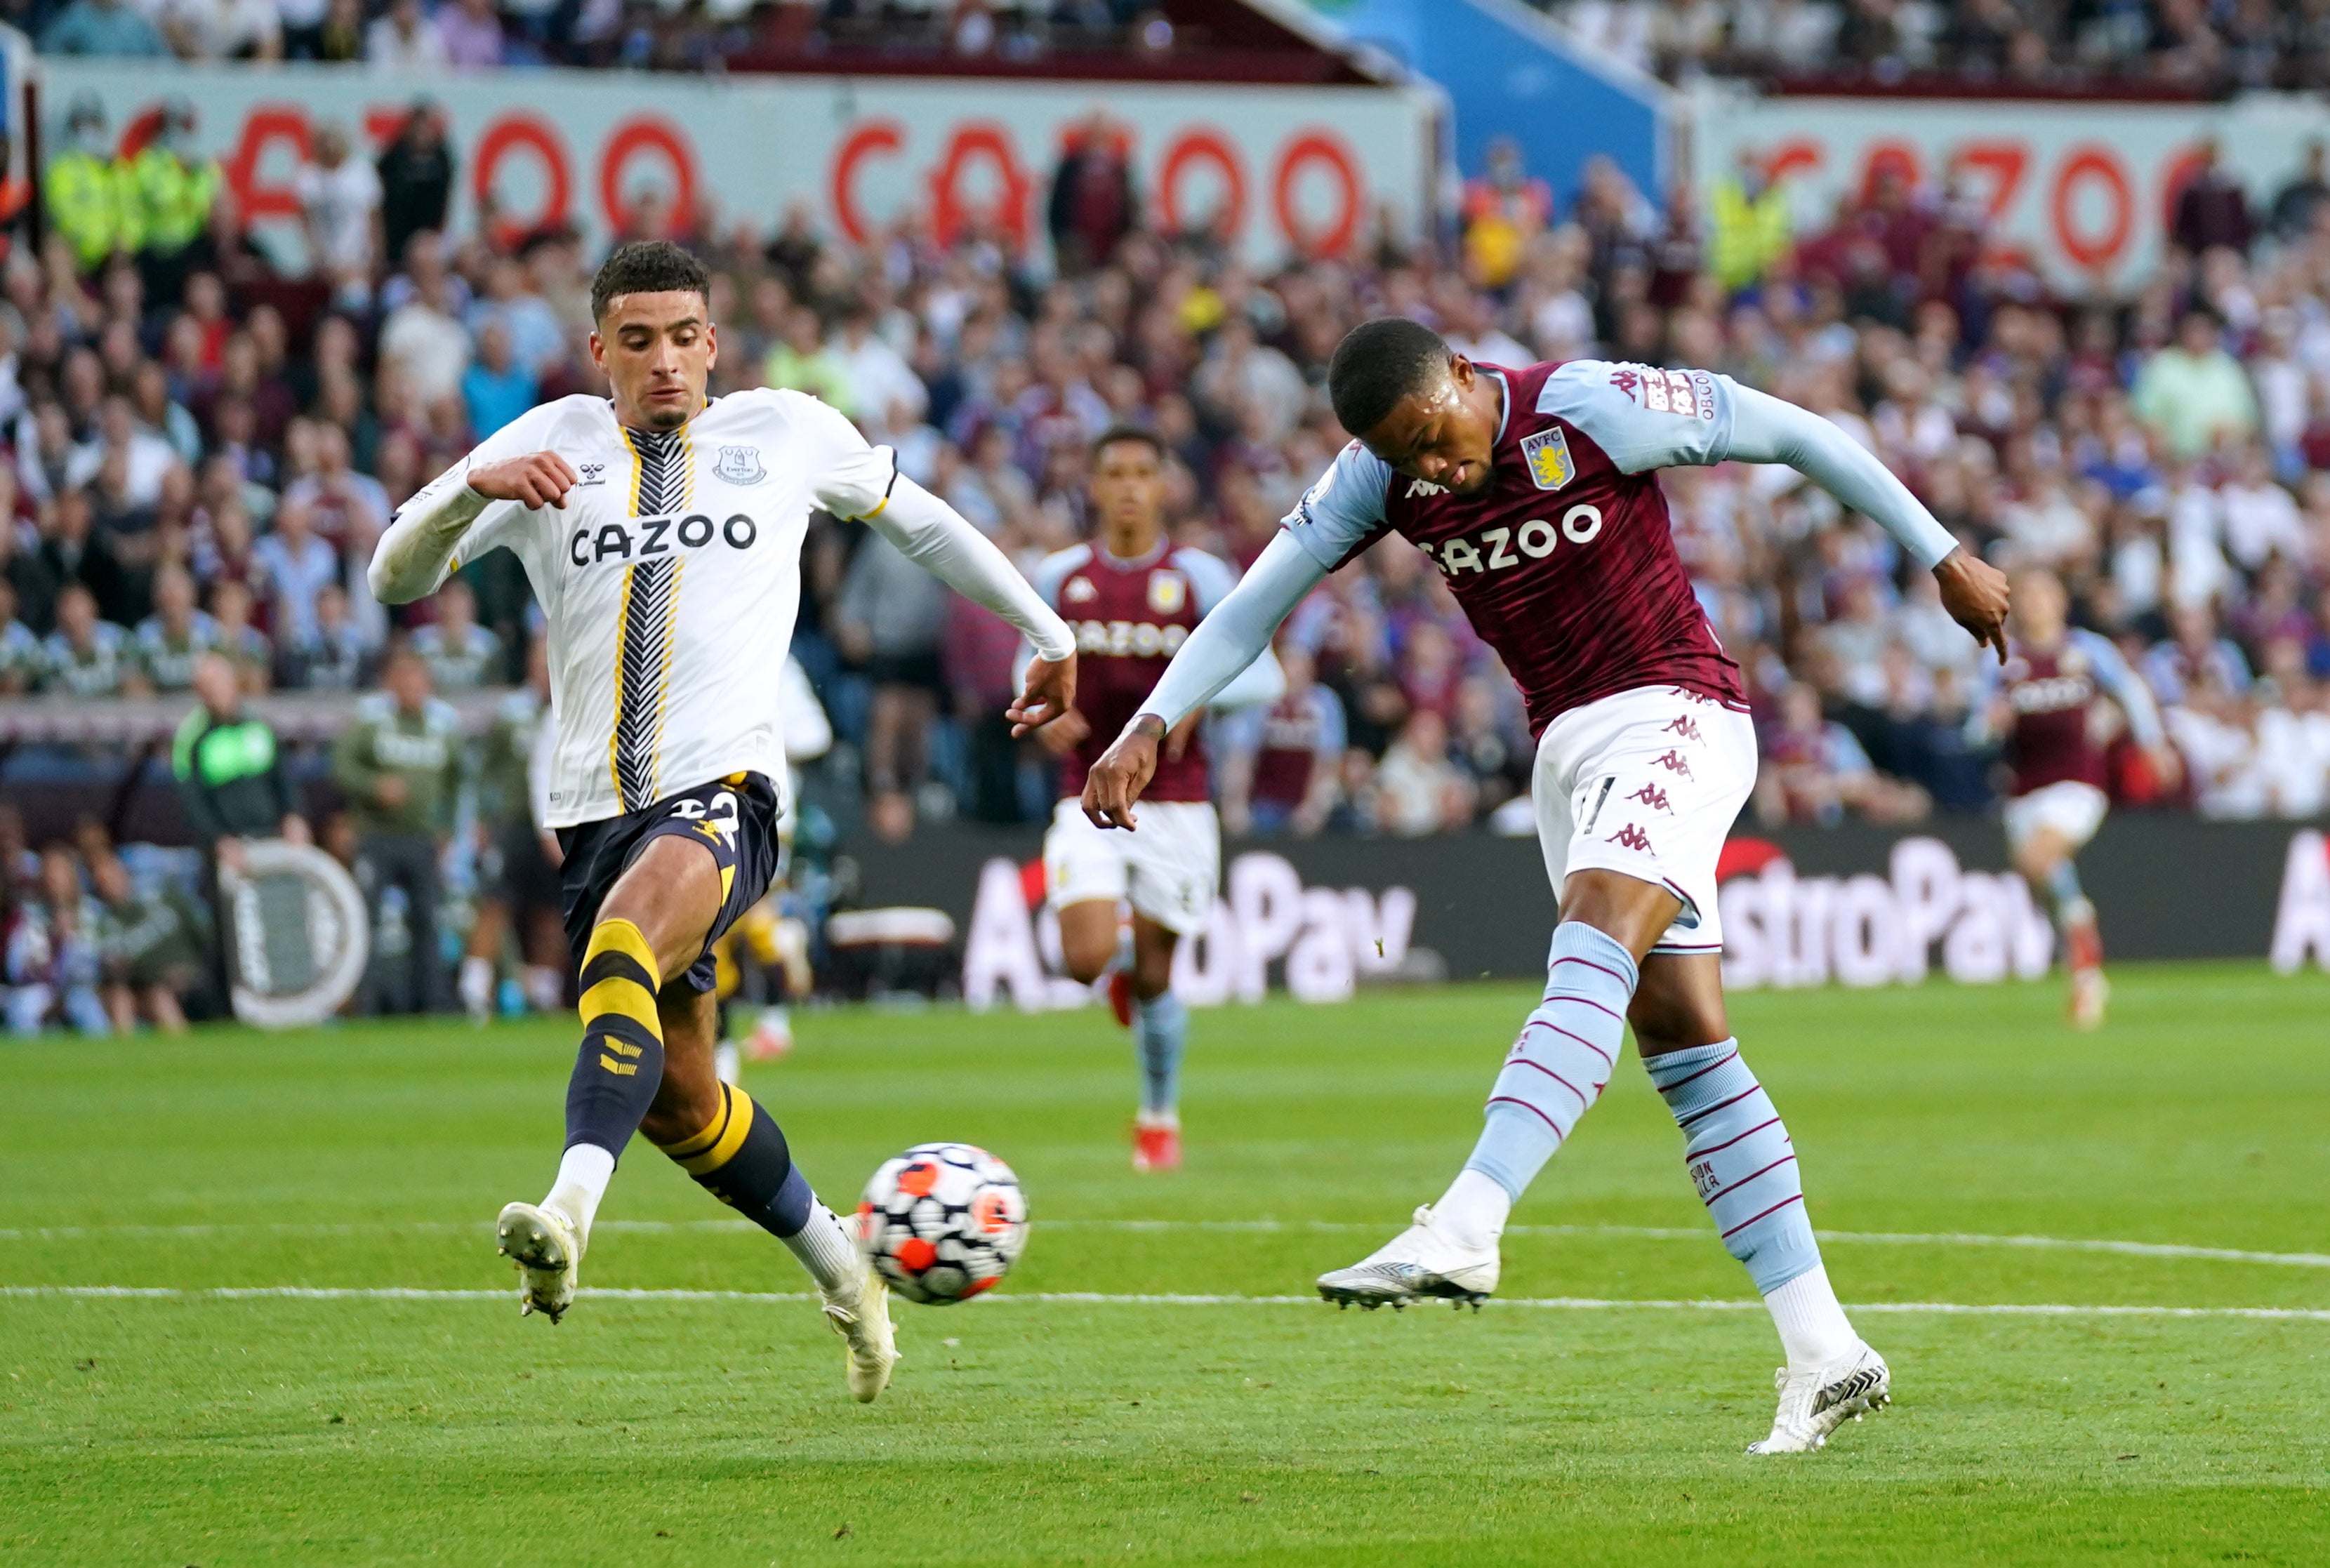 Aston Villa’s Leon Bailey added a quickfire third for the hosts (Tim Goode/PA)